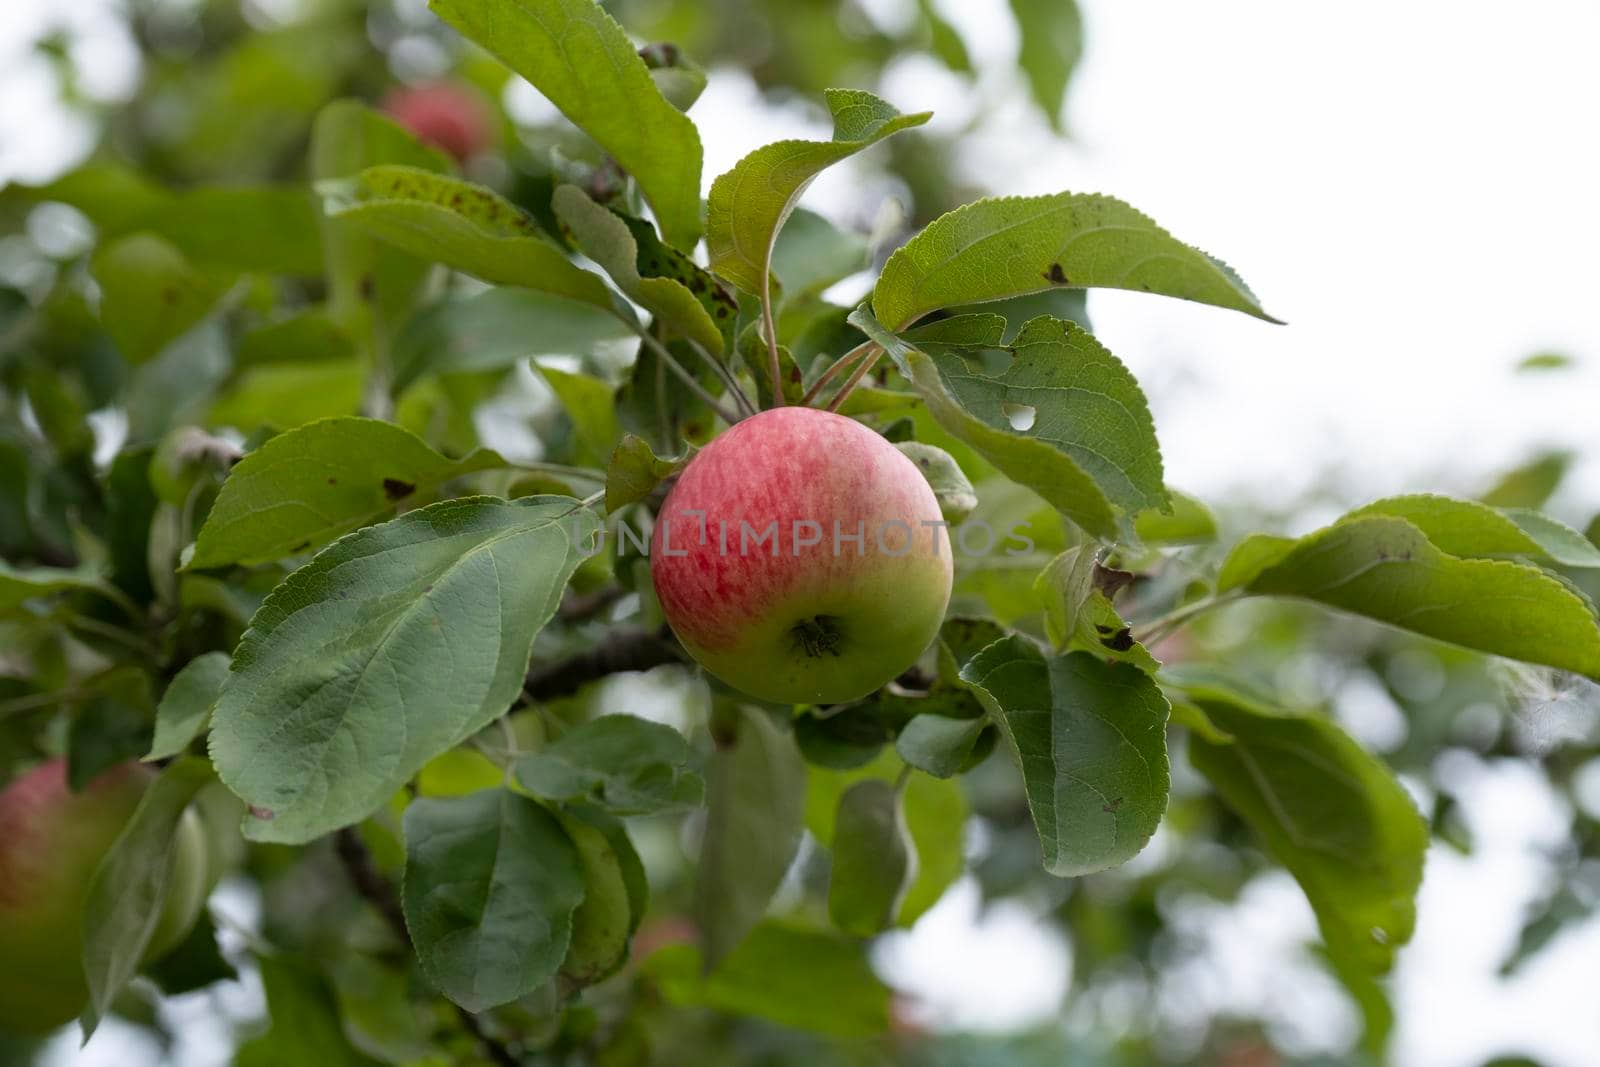 Apple tree with red apples in the sunset. A red Apple grows on a branch. Soft focus on apples. Green apples on a tree branch in the garden. by designprojects